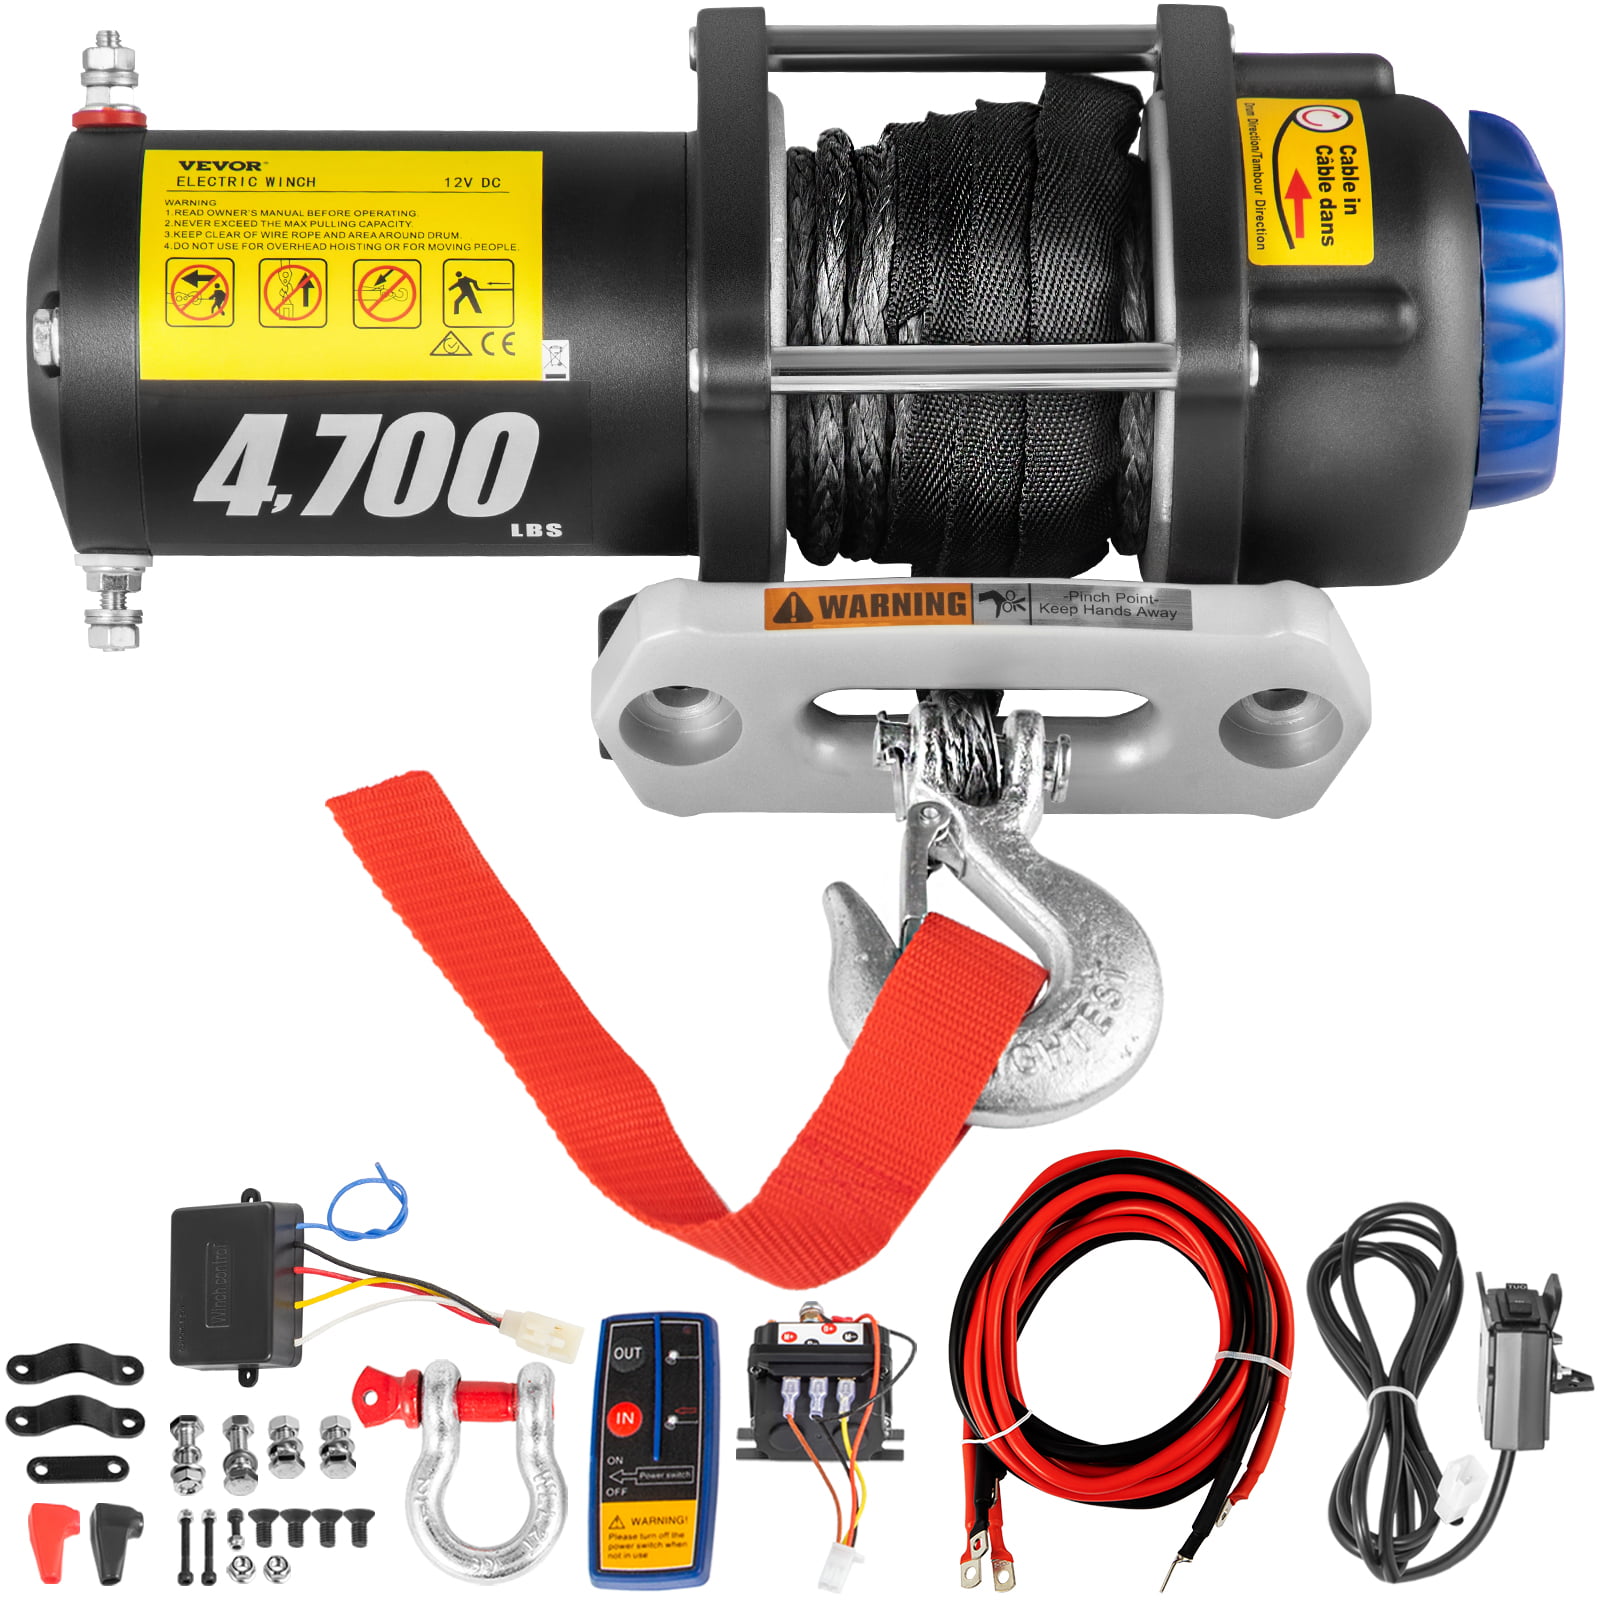 VEVOR Truck Winch 3,500LBS Electric Winch 10m/33ft Steel Cable 12V Power Winch Jeep Winch with Wireless Remote Control and Powerful Motor for UTV ATV Jeep and Truck in Car Lift 